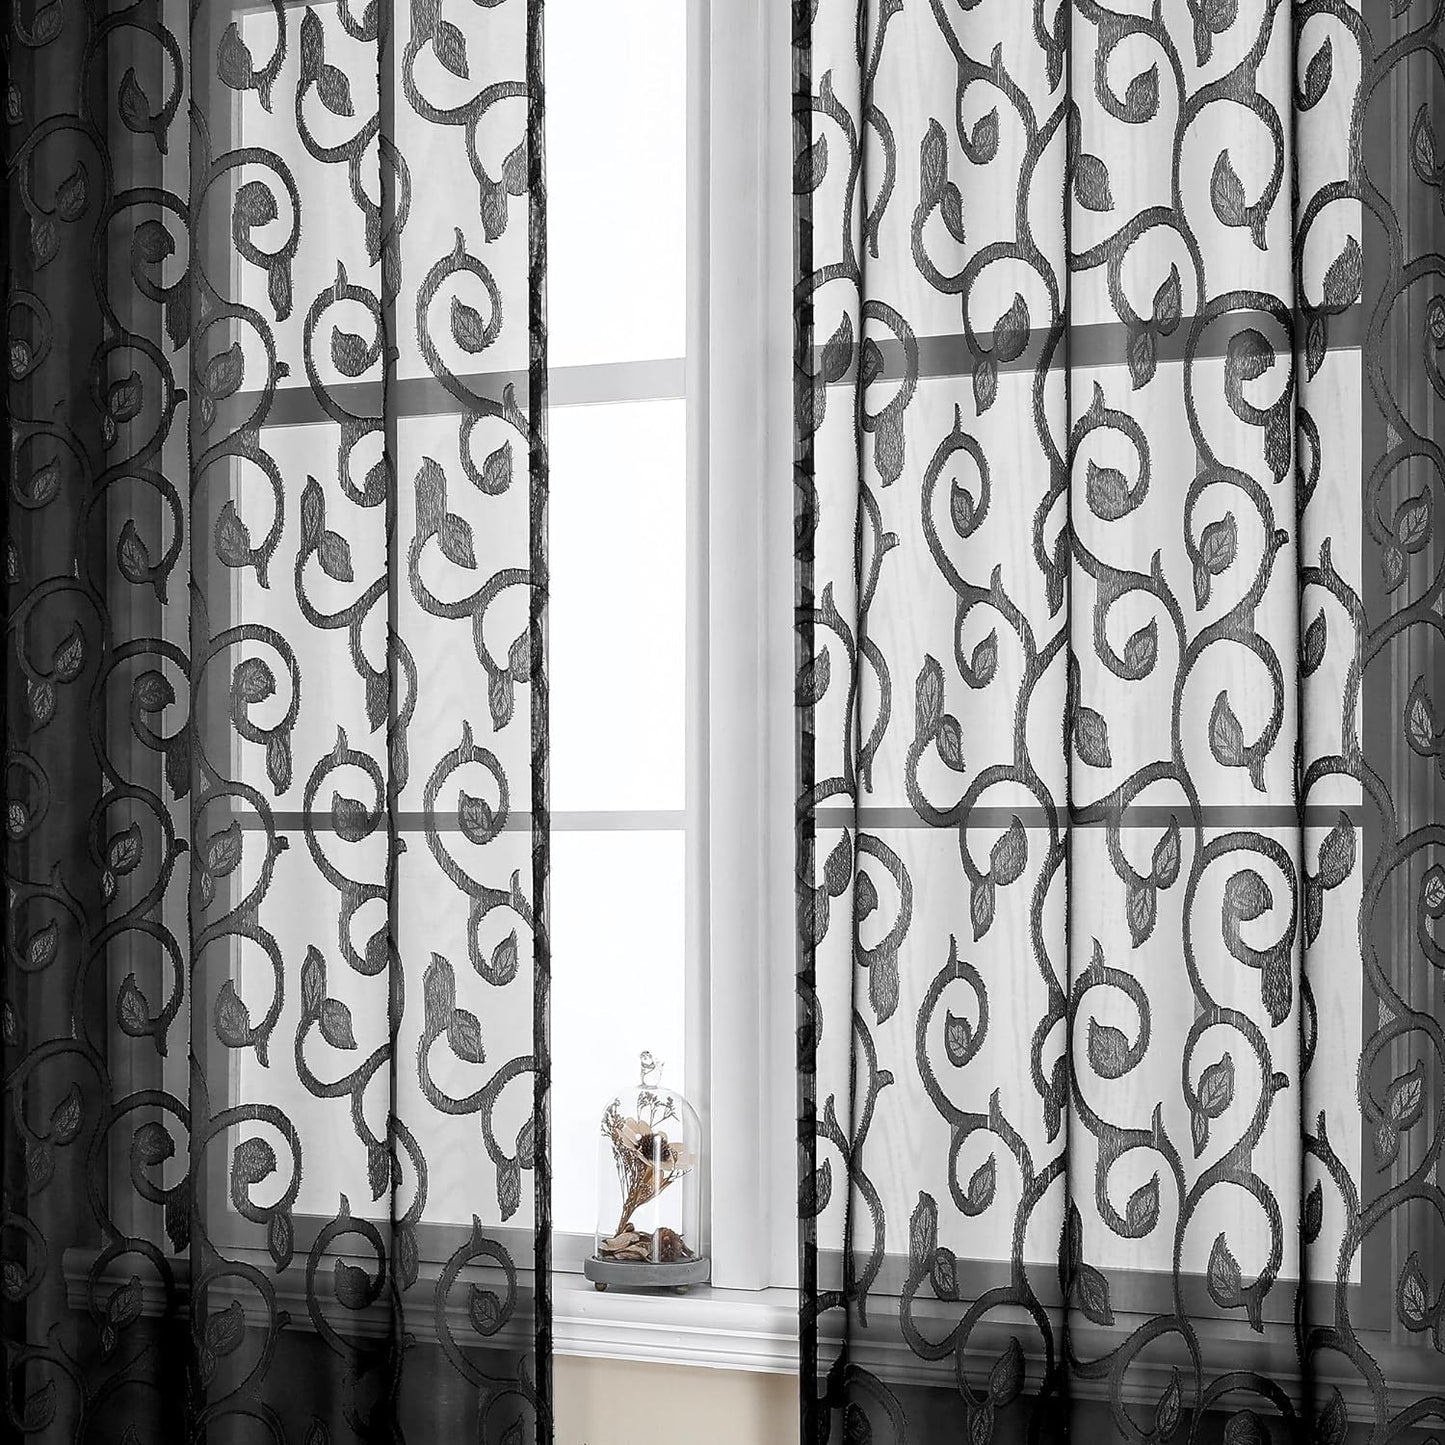 OWENIE Furman Sheer Curtains 84 Inches Long for Bedroom Living Room 2 Panels Set, Light Filtering Window Curtains, Semi Transparent Voile Top Dual Rod Pocket, Grey, 40Wx84L Inch, Total 84 Inches Width  OWENIE Black 40W X 84L 